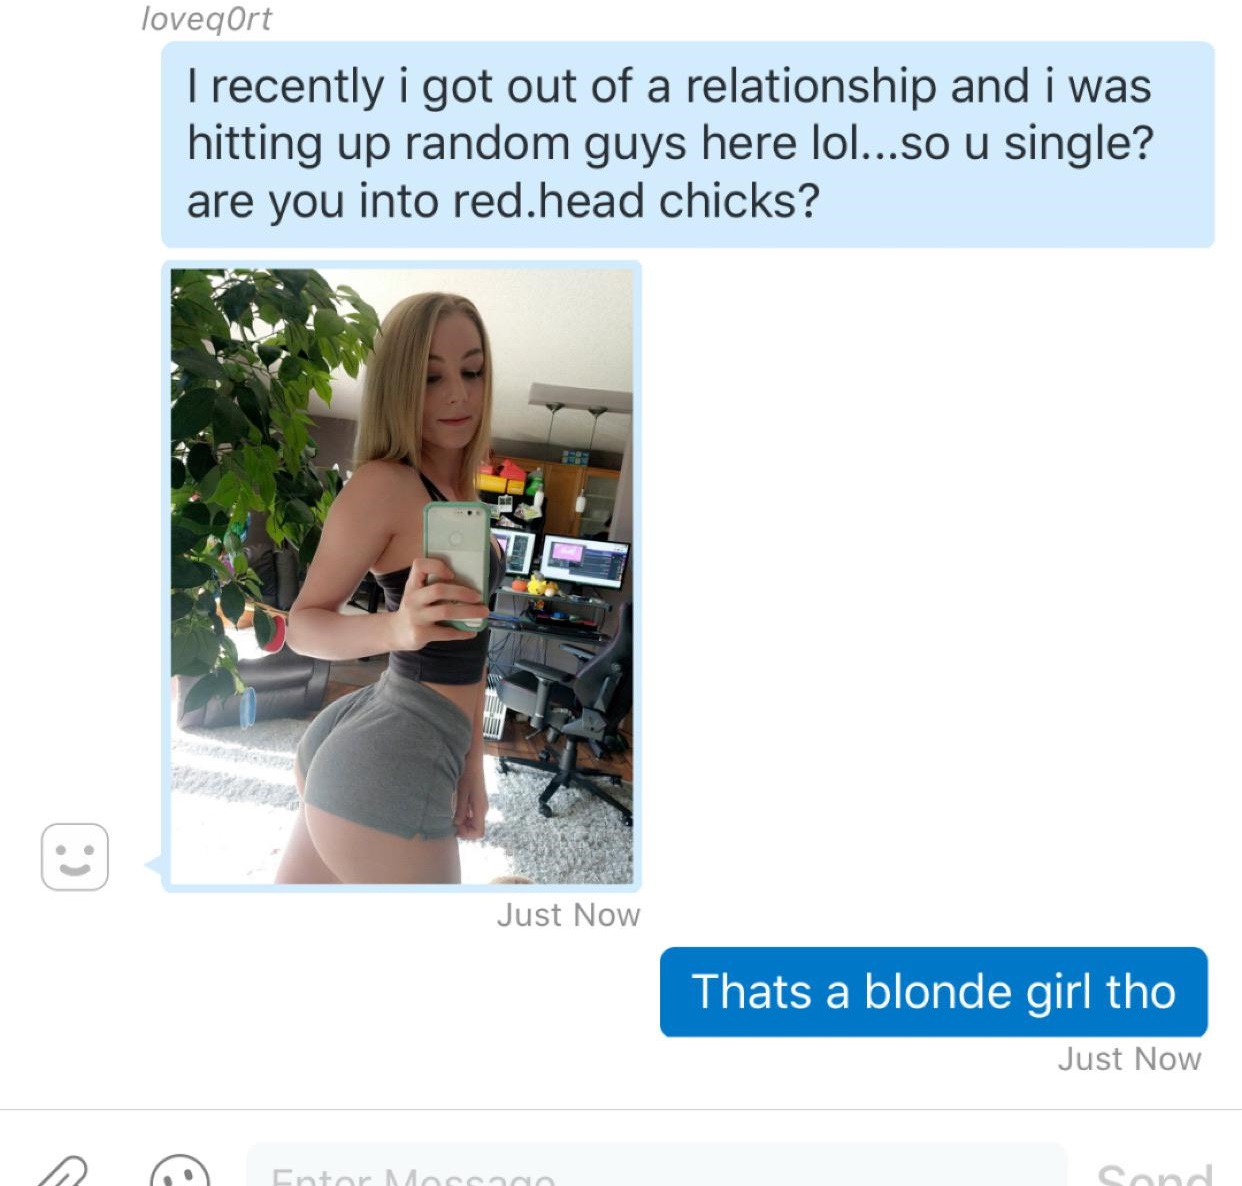 stpeach whooty - loveqort I recently i got out of a relationship and i was hitting up random guys here lol...so u single? are you into red.head chicks? Just Now Thats a blonde girl tho Just Now m Entor More